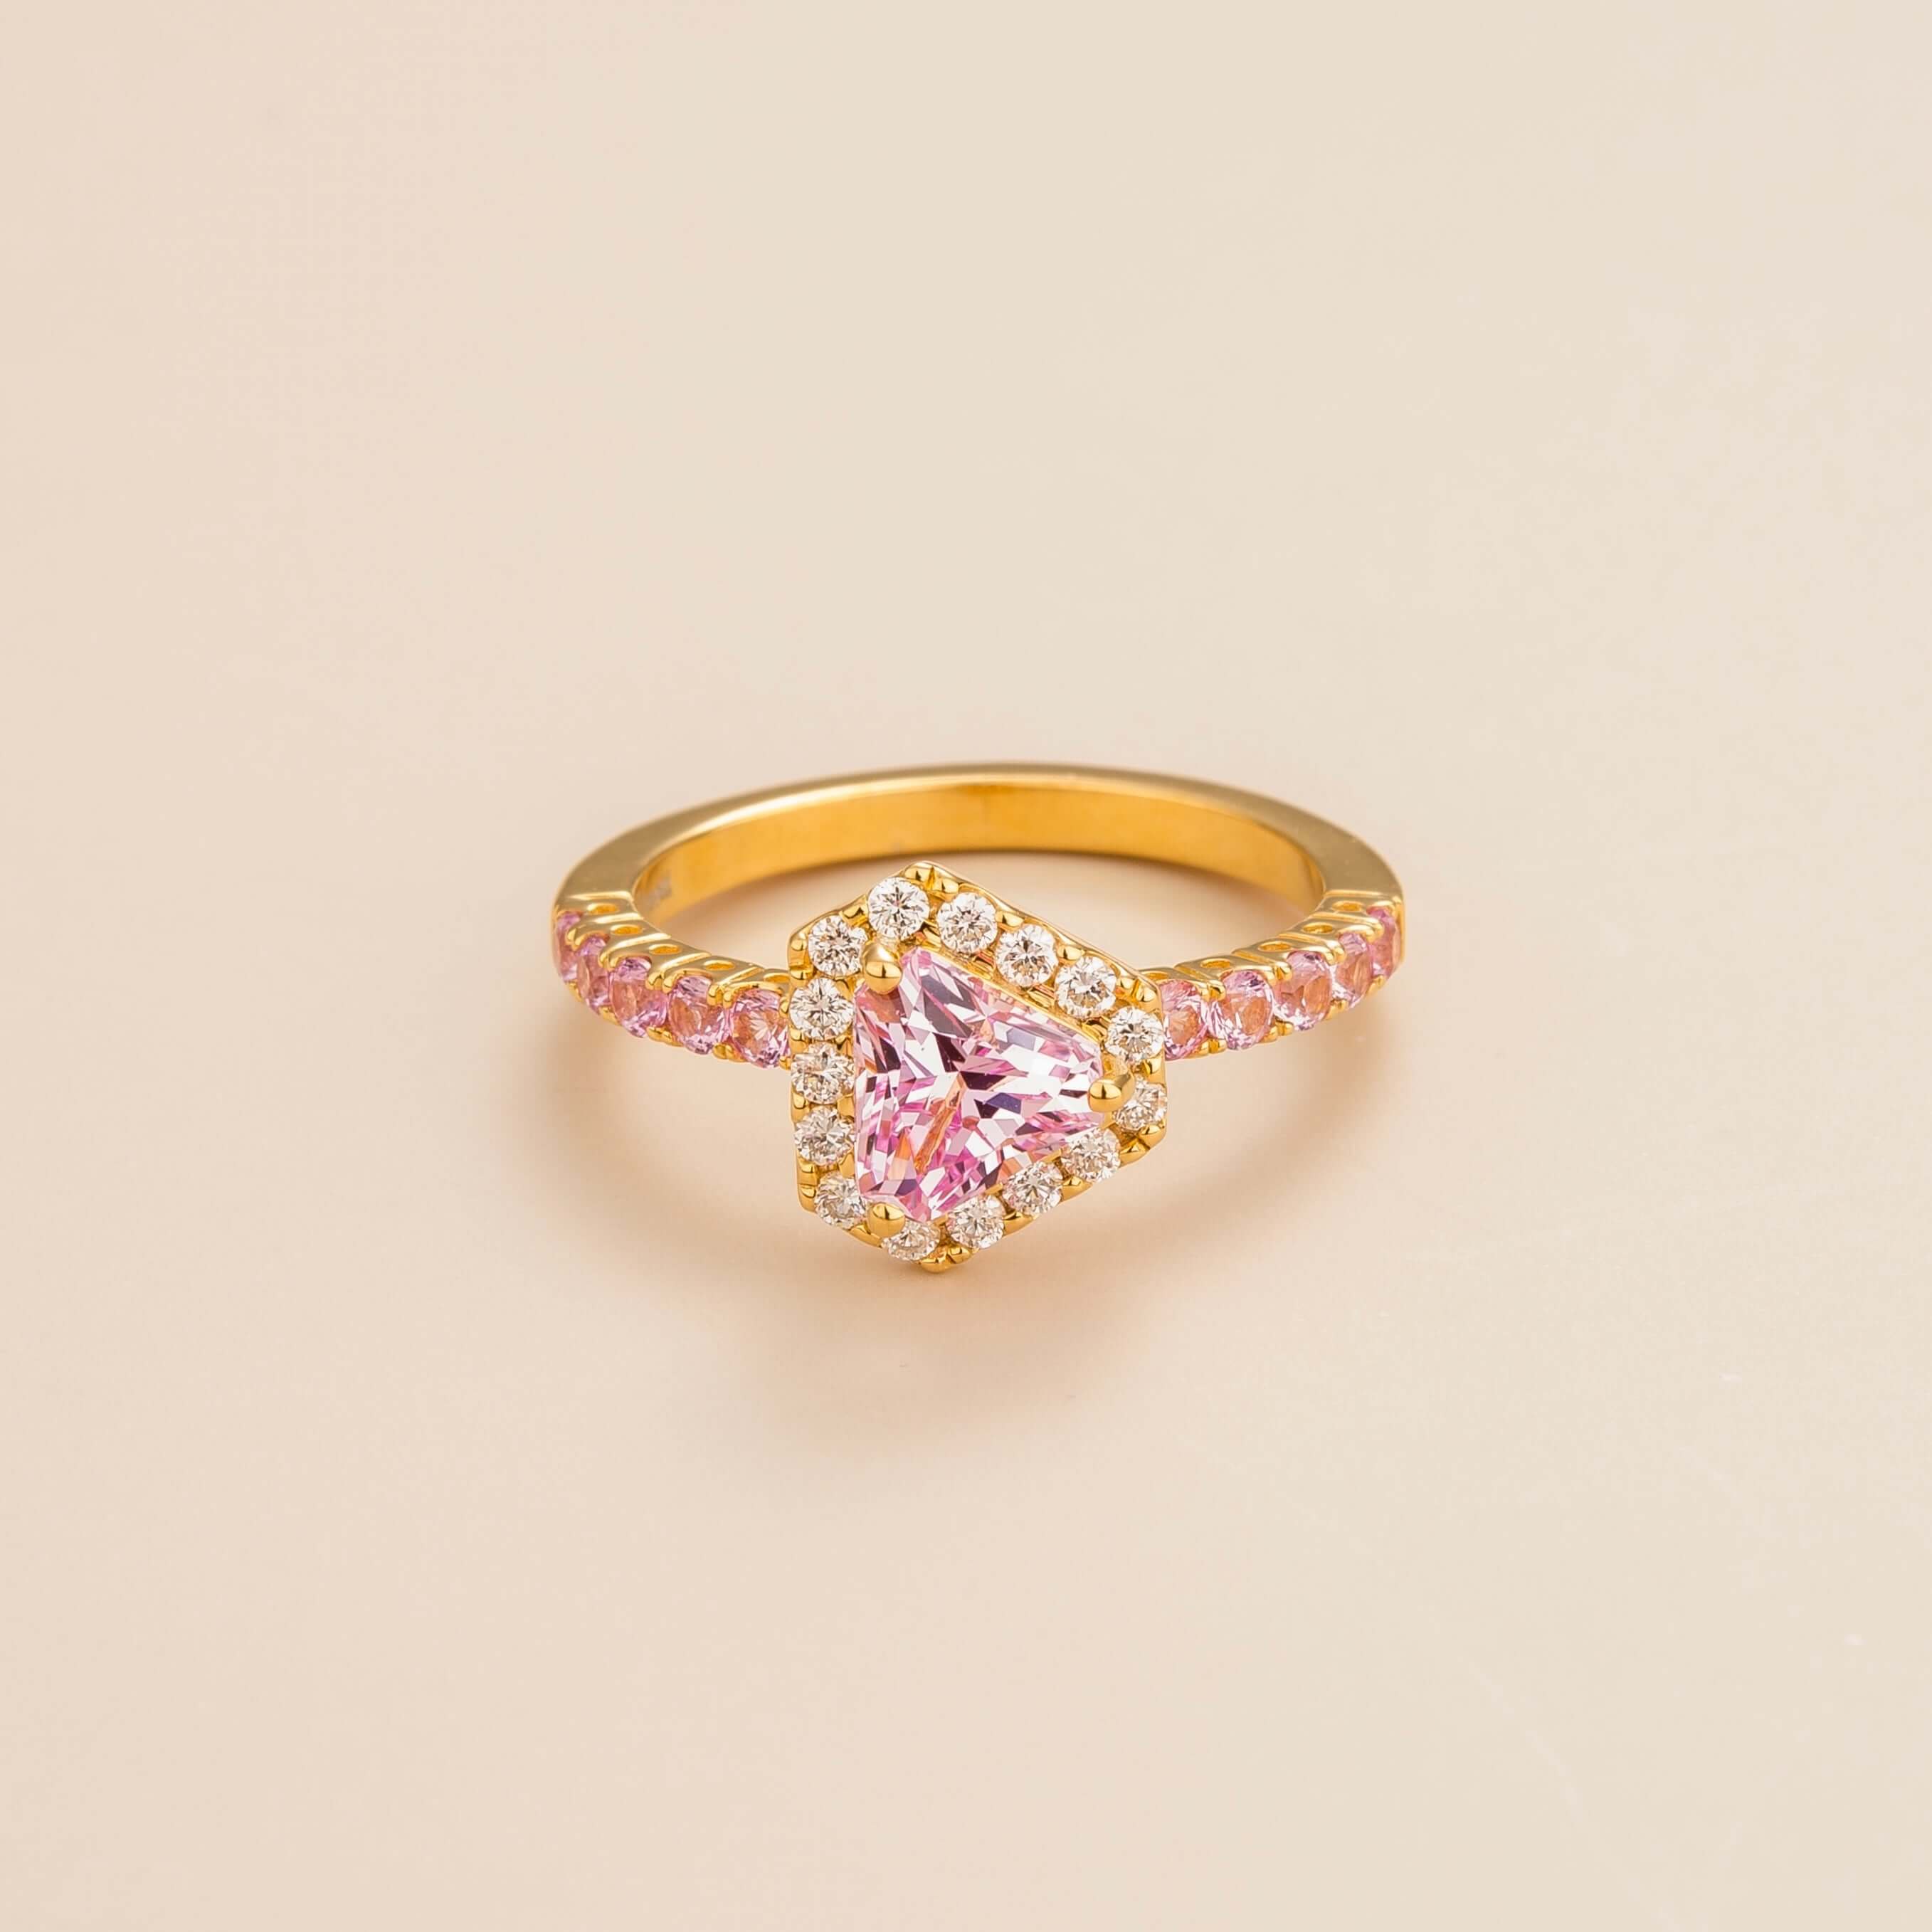 Diana ring in 18K gold vermeil set with lab grown diamond and triangle pink sapphire gem stones.